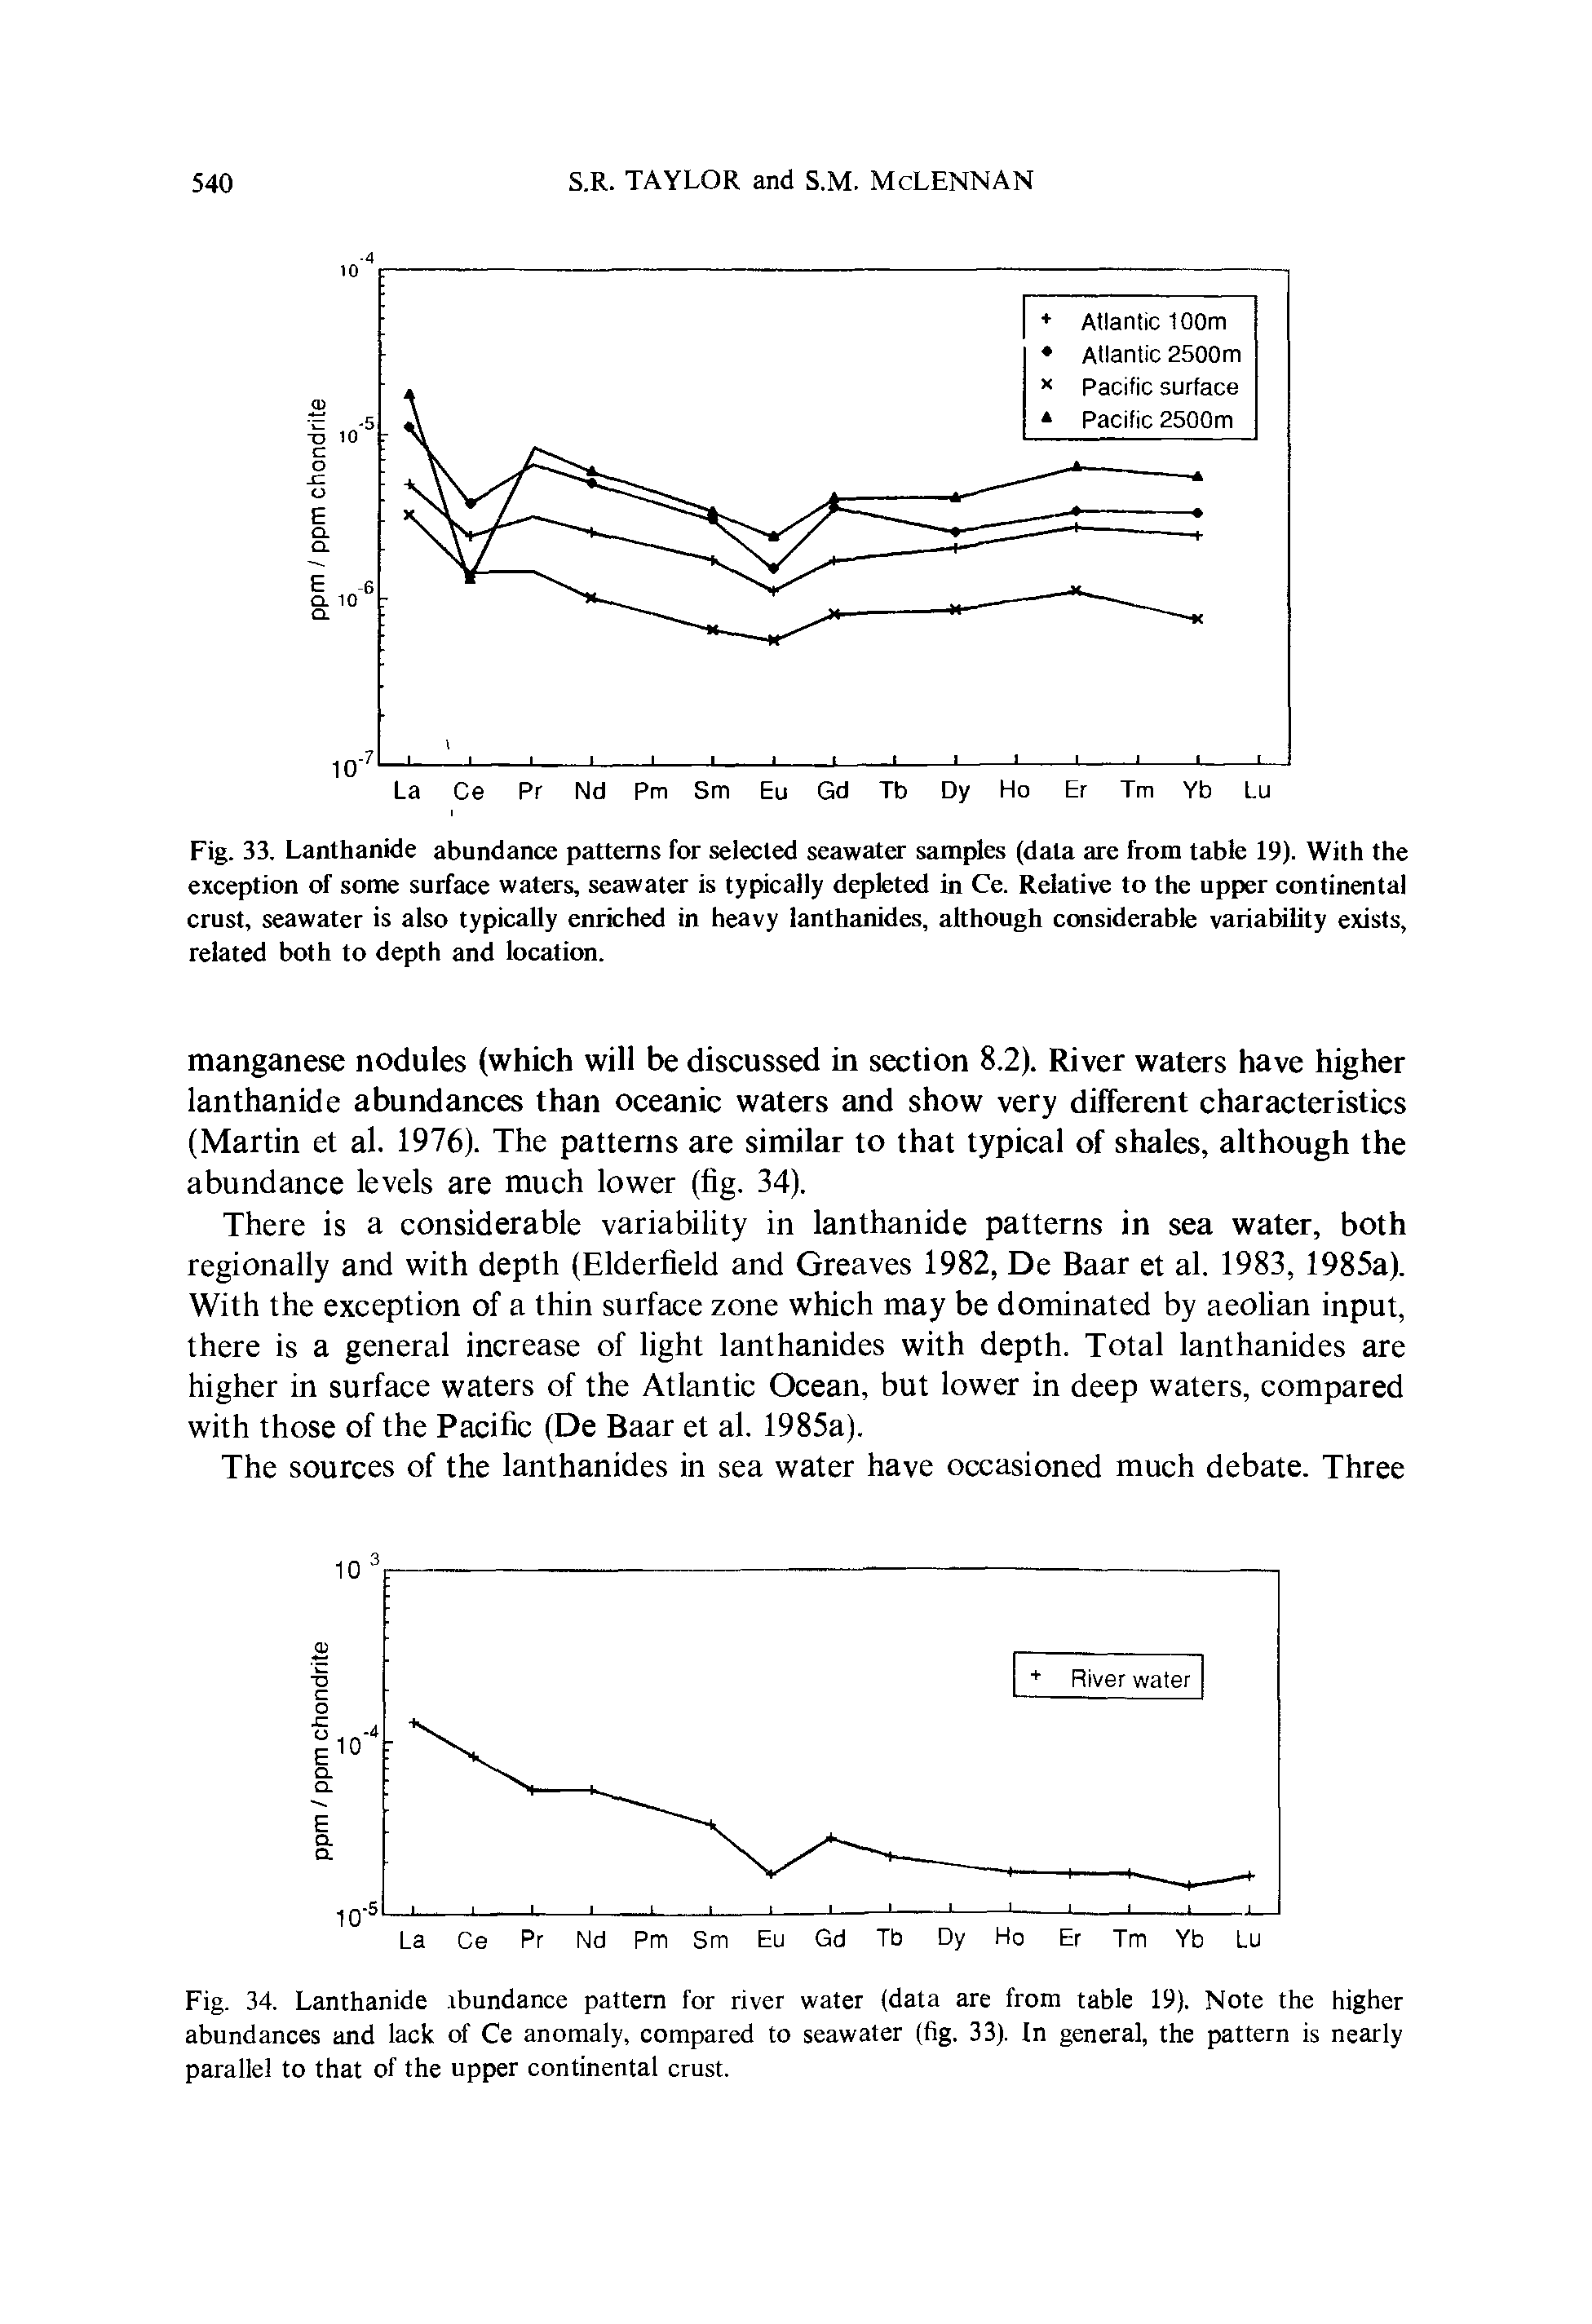 Fig. 33. Lanthanide abundance patterns for selected seawater samples (data are from table 19). With the exception of some surface waters, seawater is typically depleted in Ce. Relative to the upper continental crust, seawater is also typically enriched in heavy lanthanides, although considerable variability exists, related both to depth and loeation.